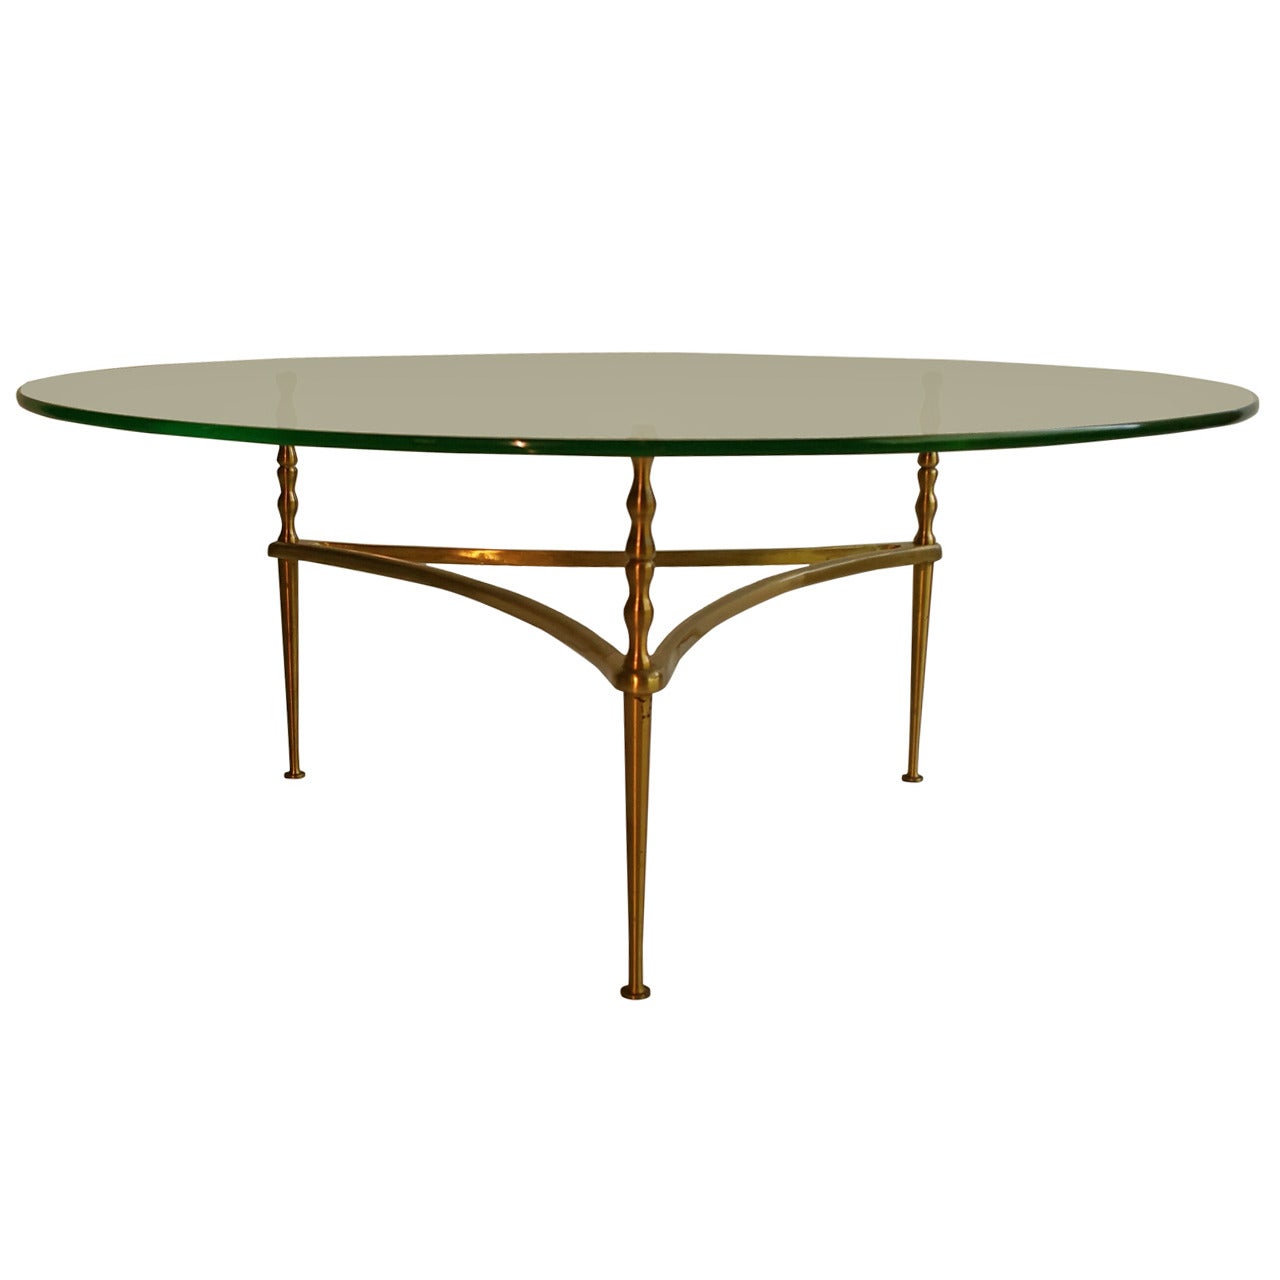 Modernist Italian Glass and Brass Coffee Table, Manner of Gio Ponti